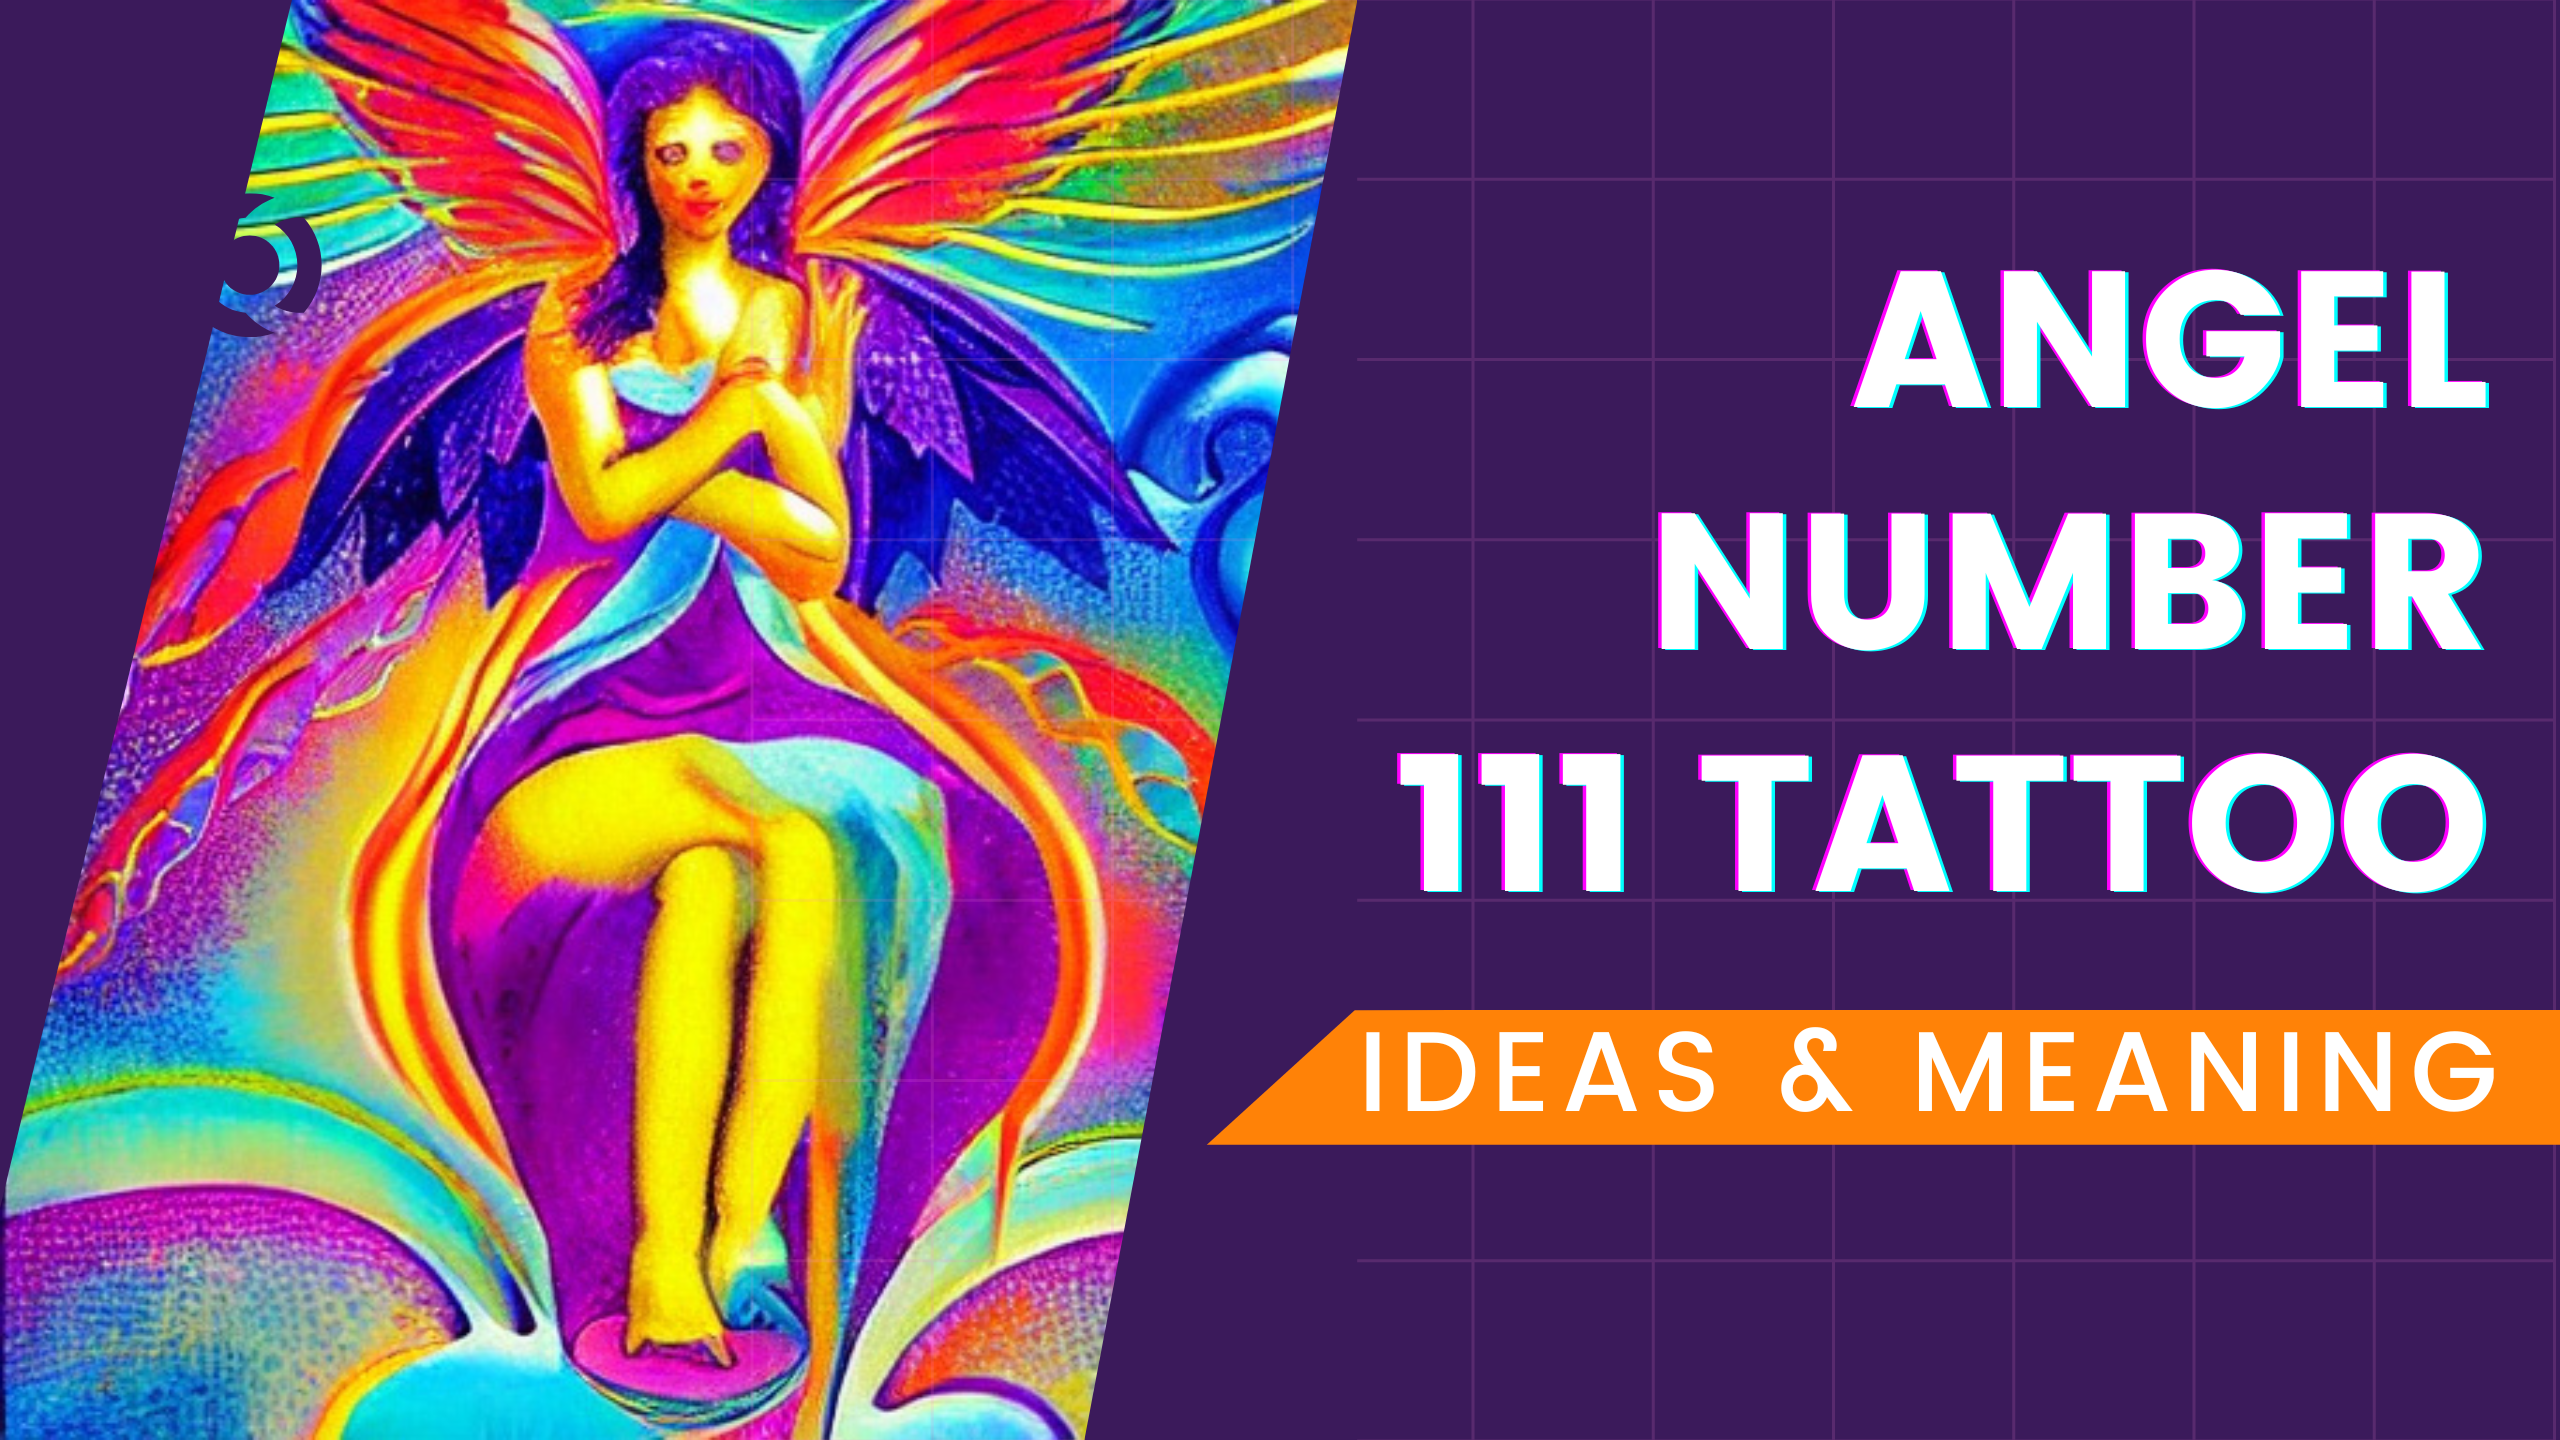 111 tattoo ideas and meaning angel number